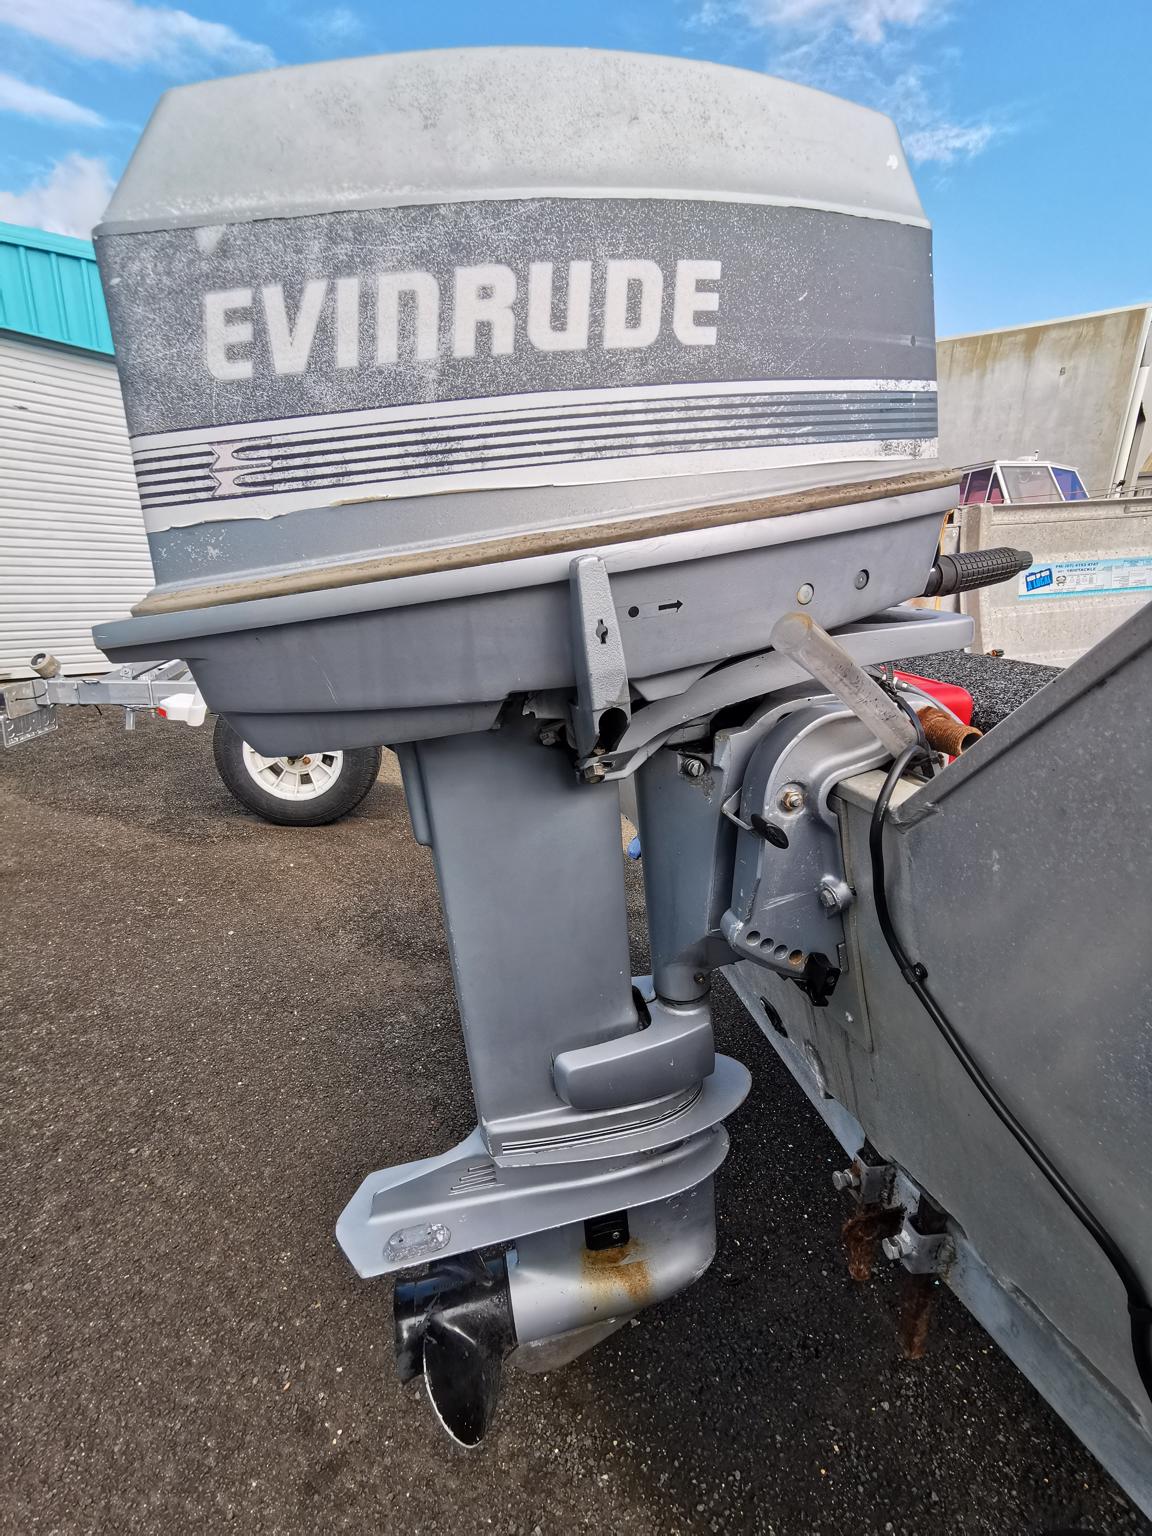 Stacer 3.9 Seasprite Boat, Motor And Trailer Package 25hp Evinrude 02 Adrians Marine Centre